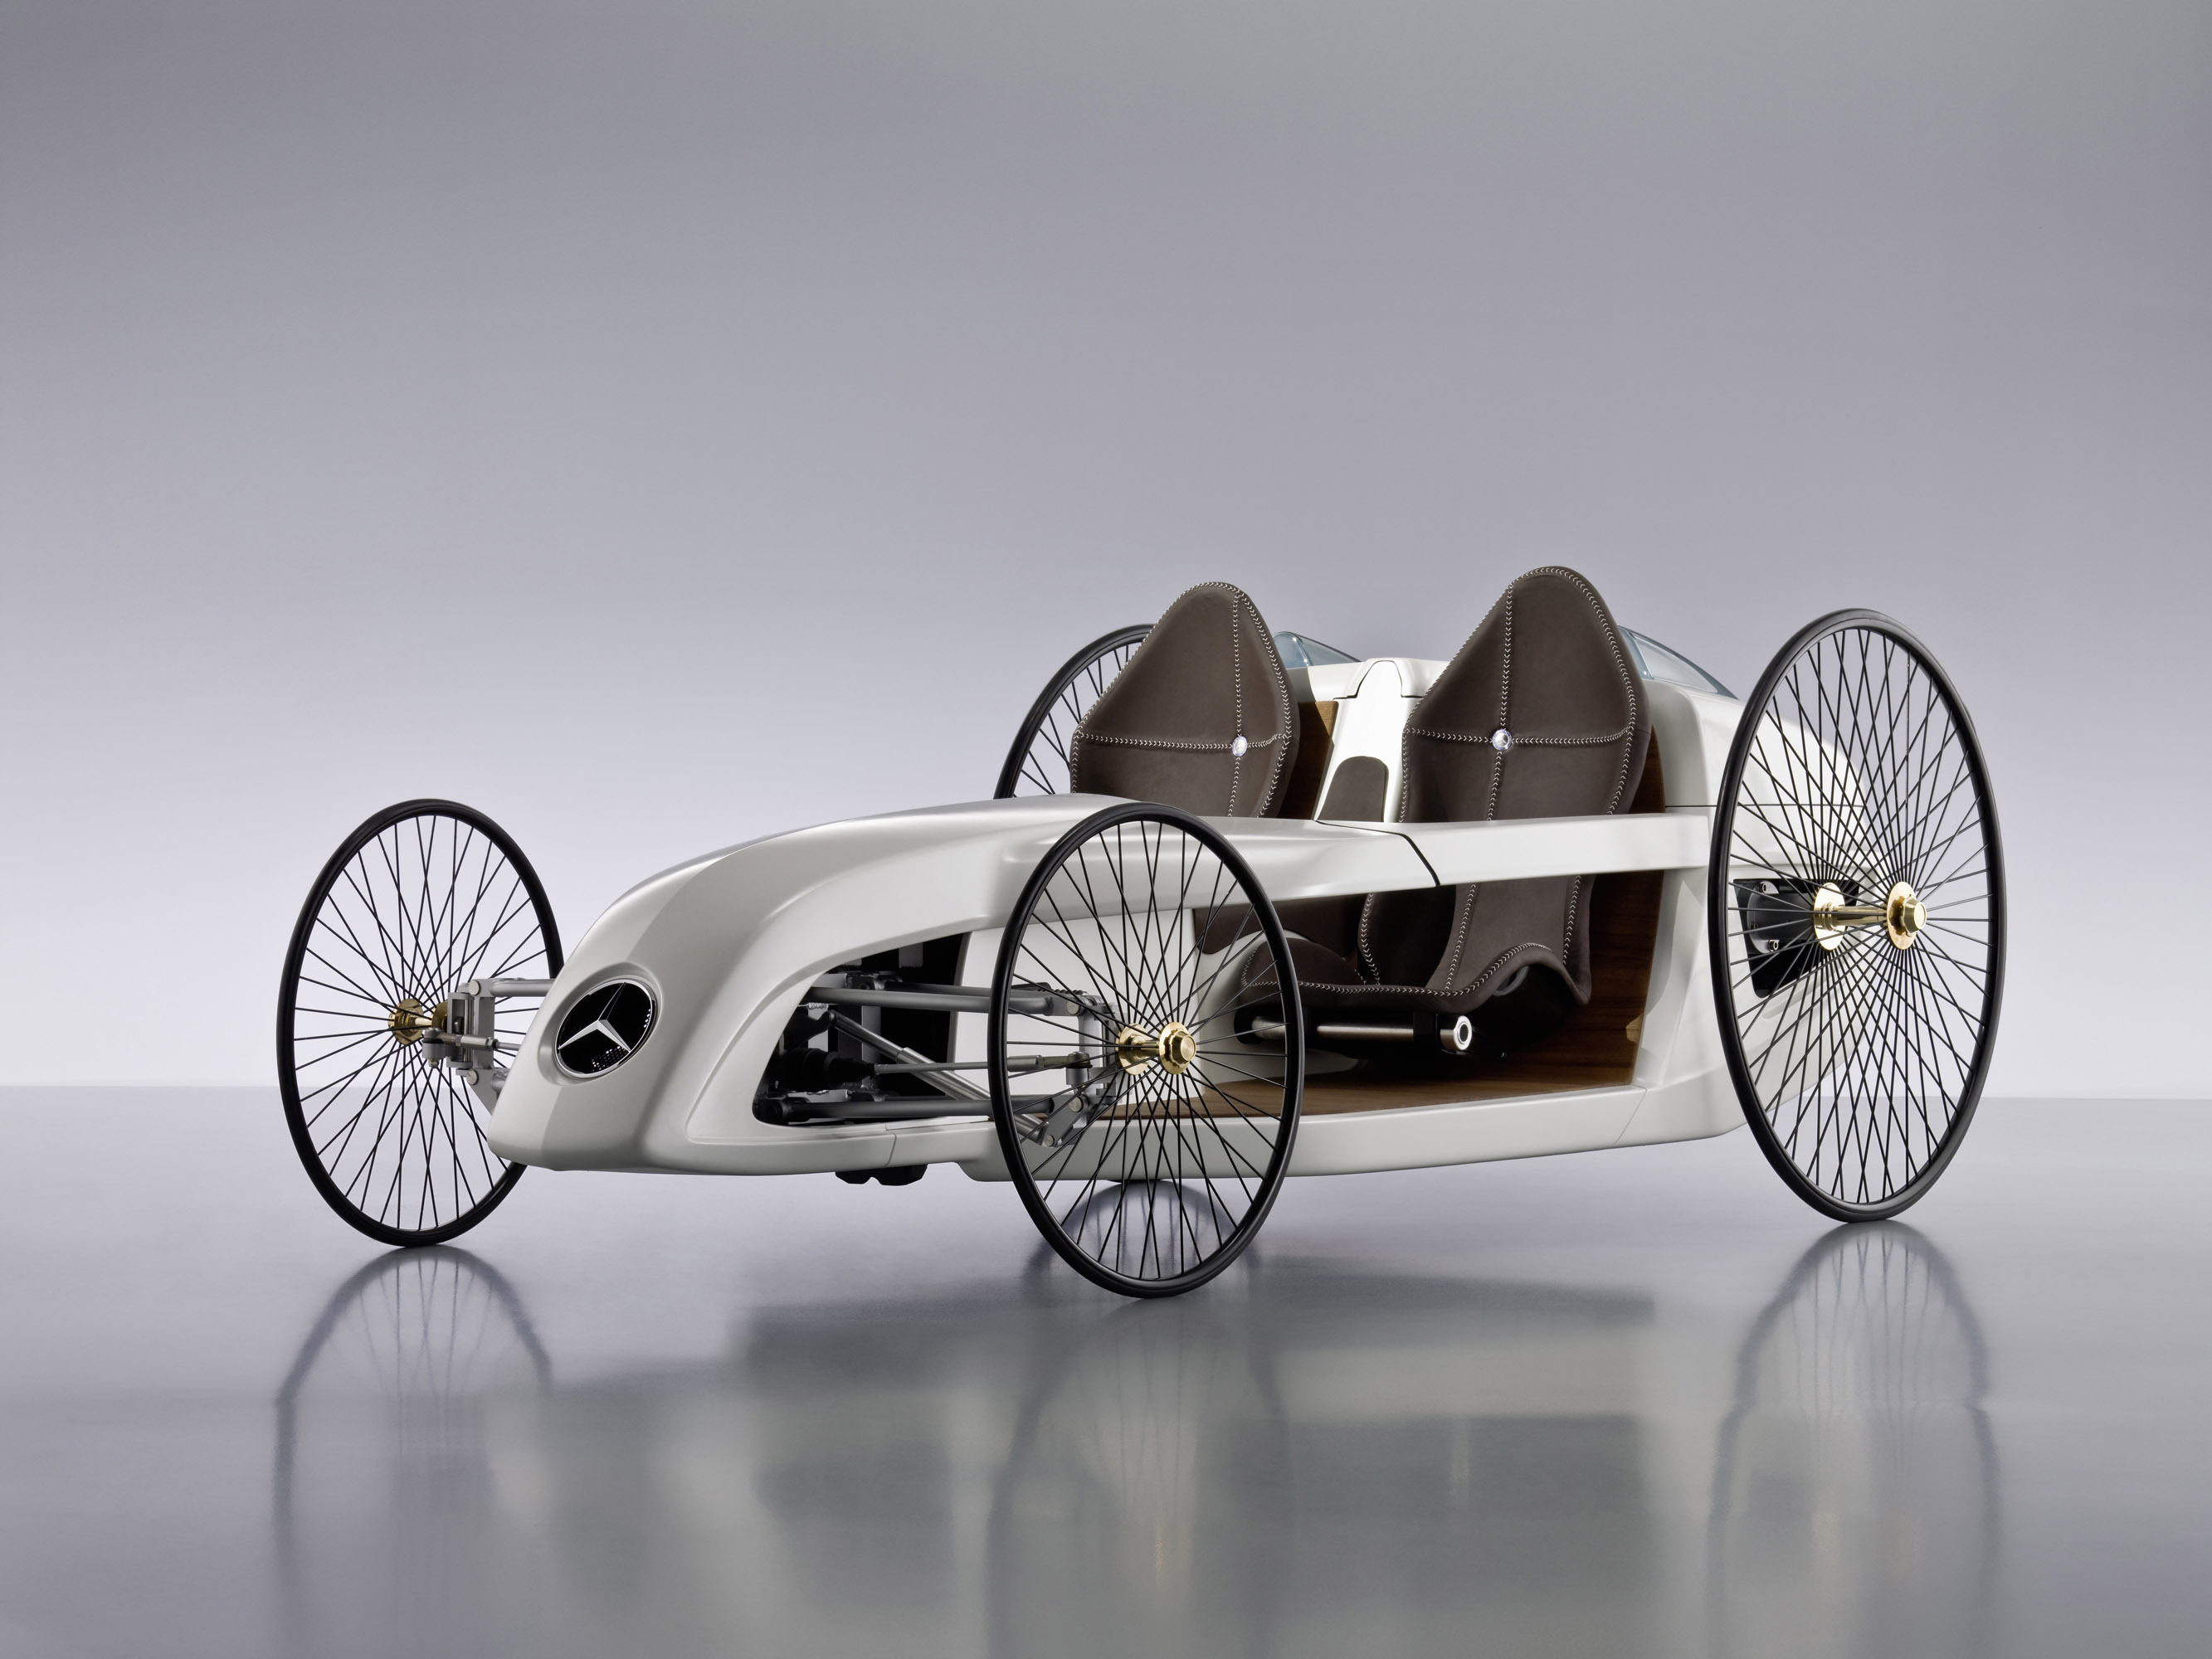 Mercedes-Benz F-Cell Roadster Concept photo #1